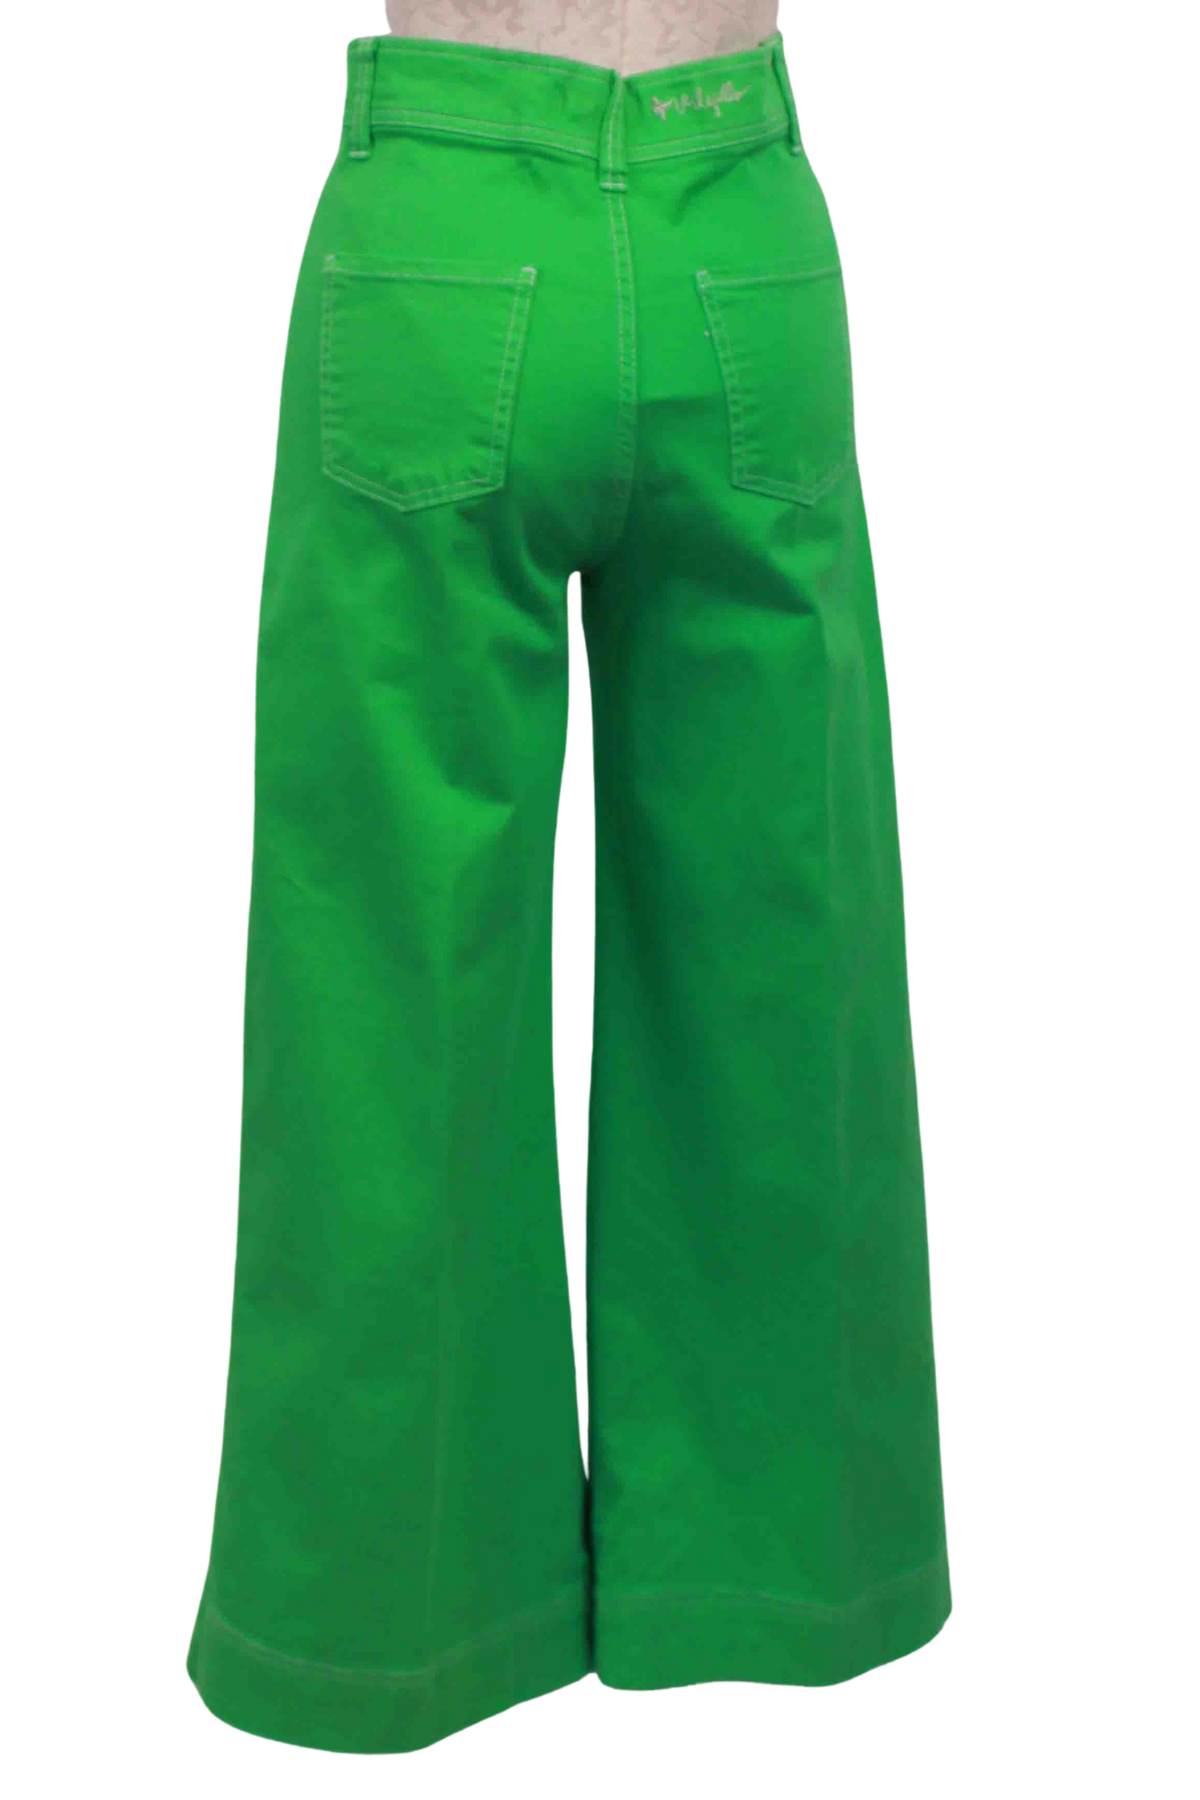 back view of Noa Green Trouser by Vilagallo